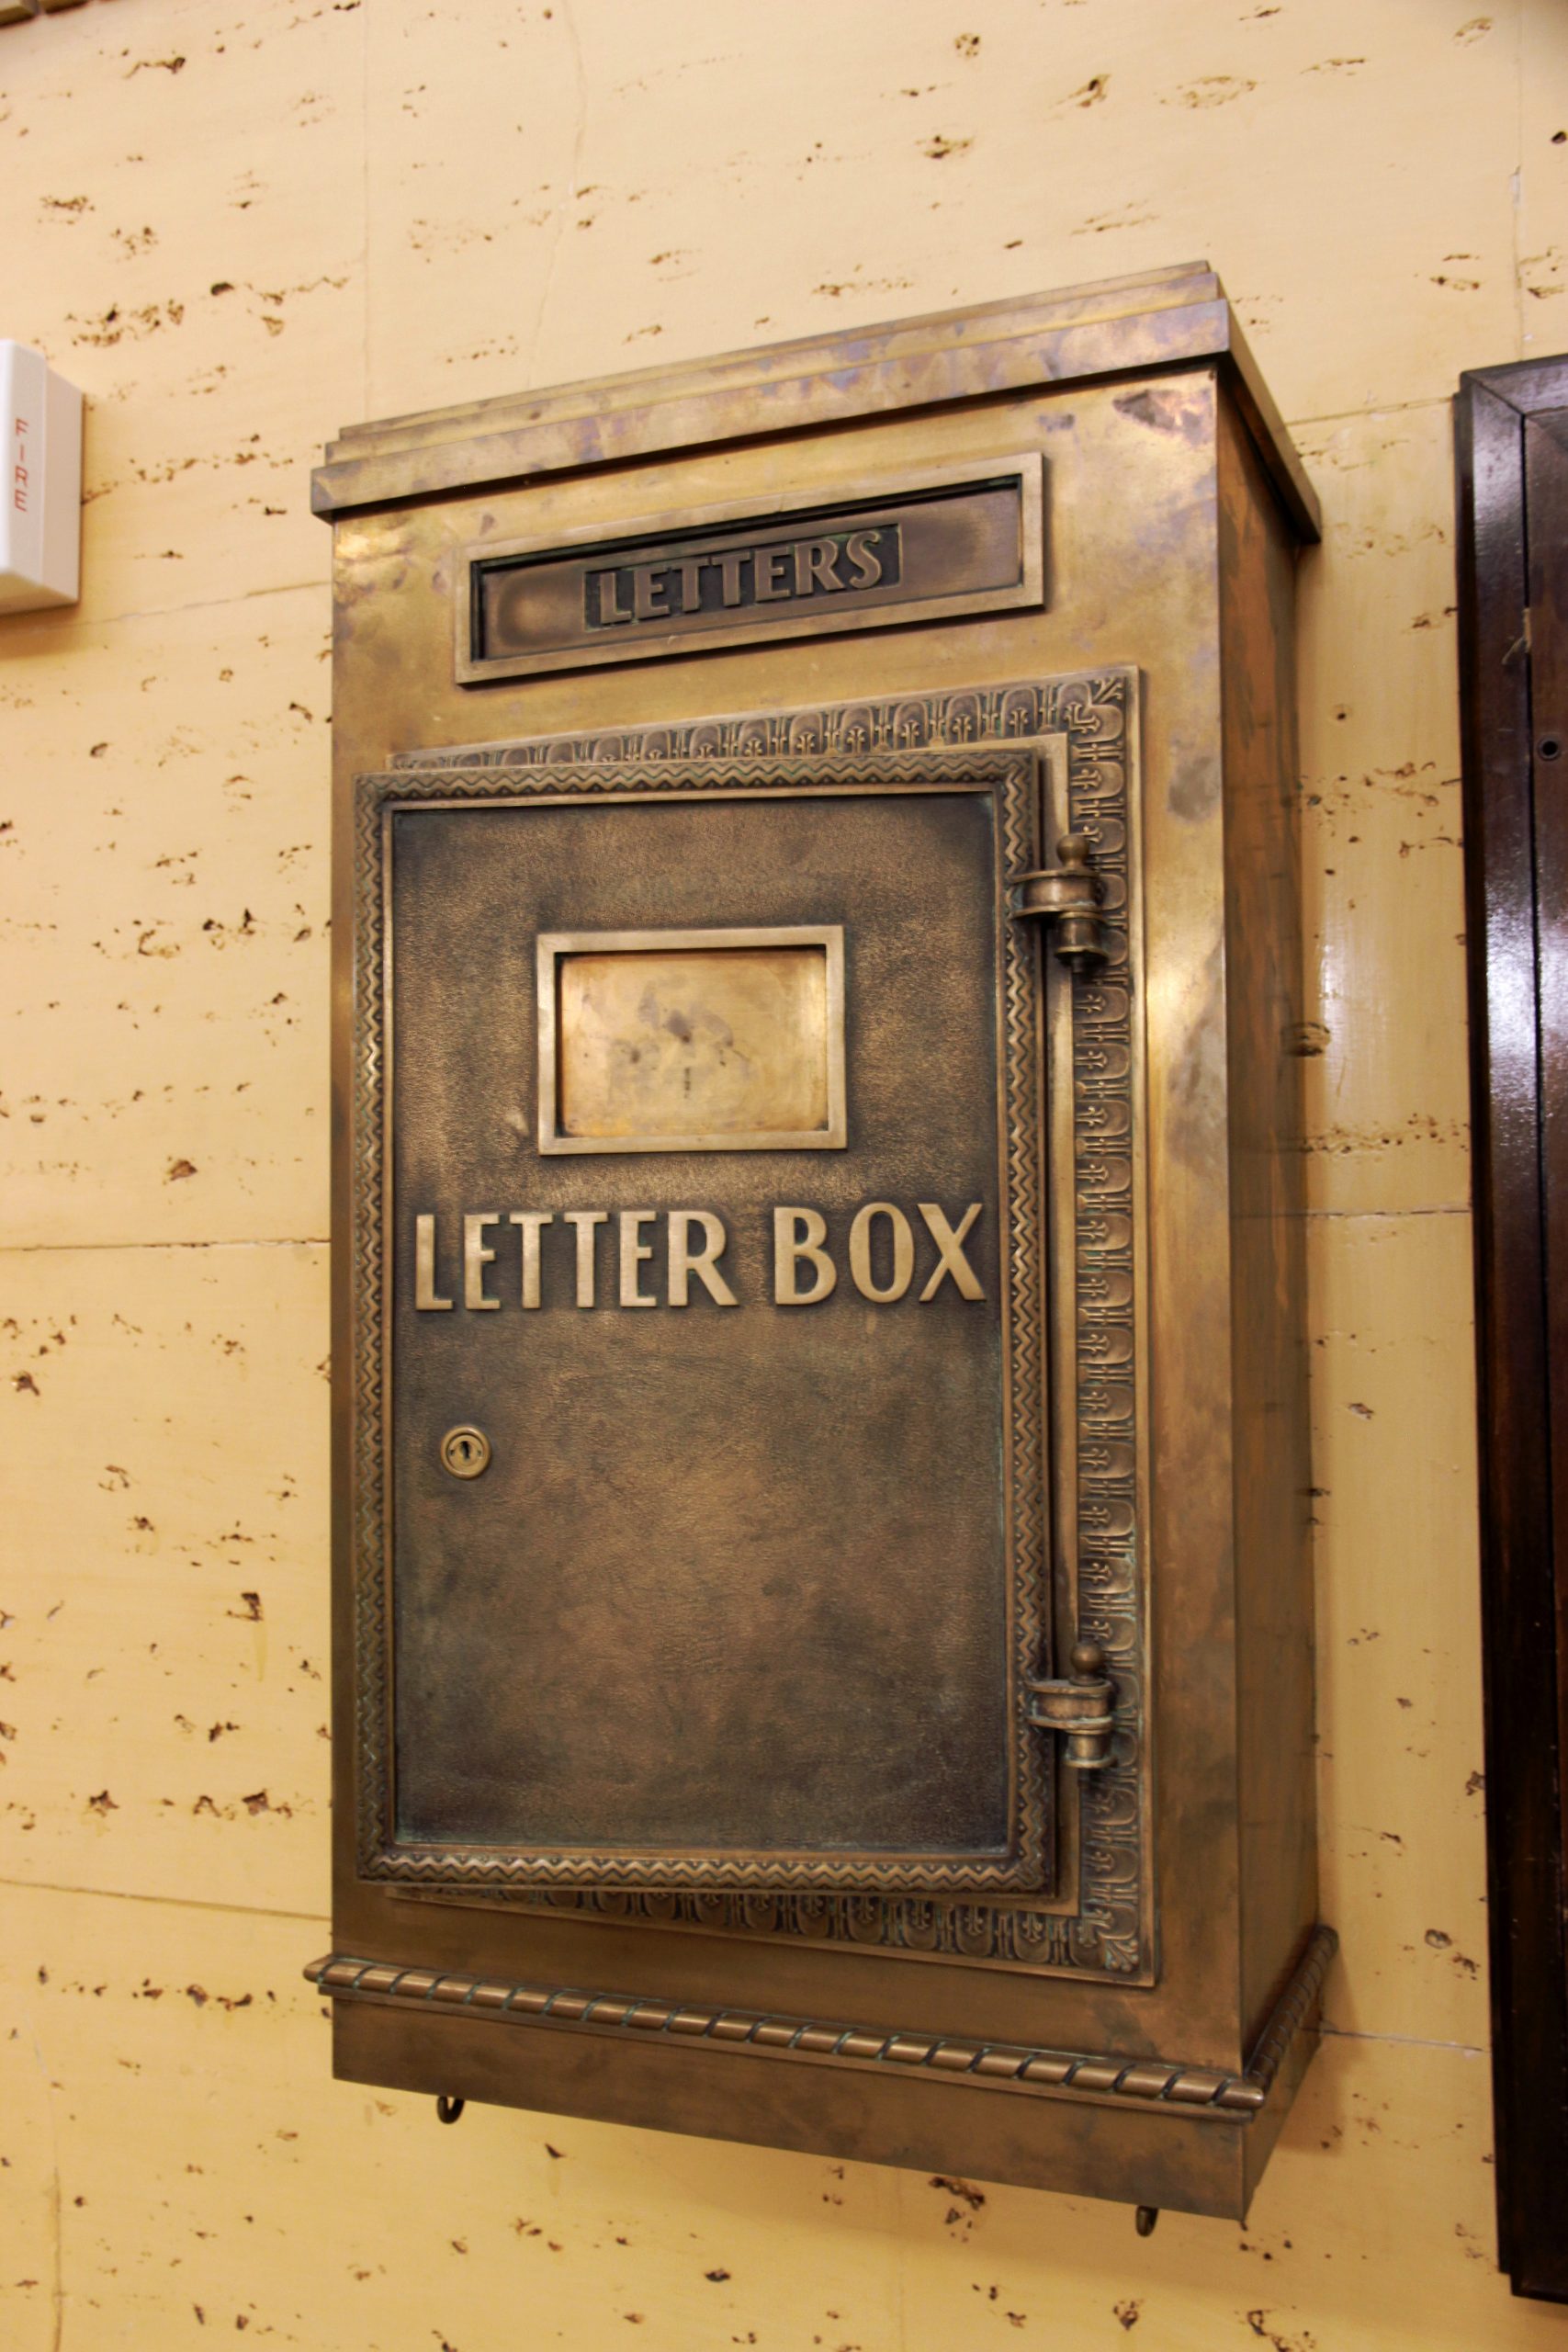 A golden letter box fit for administrators is left open.